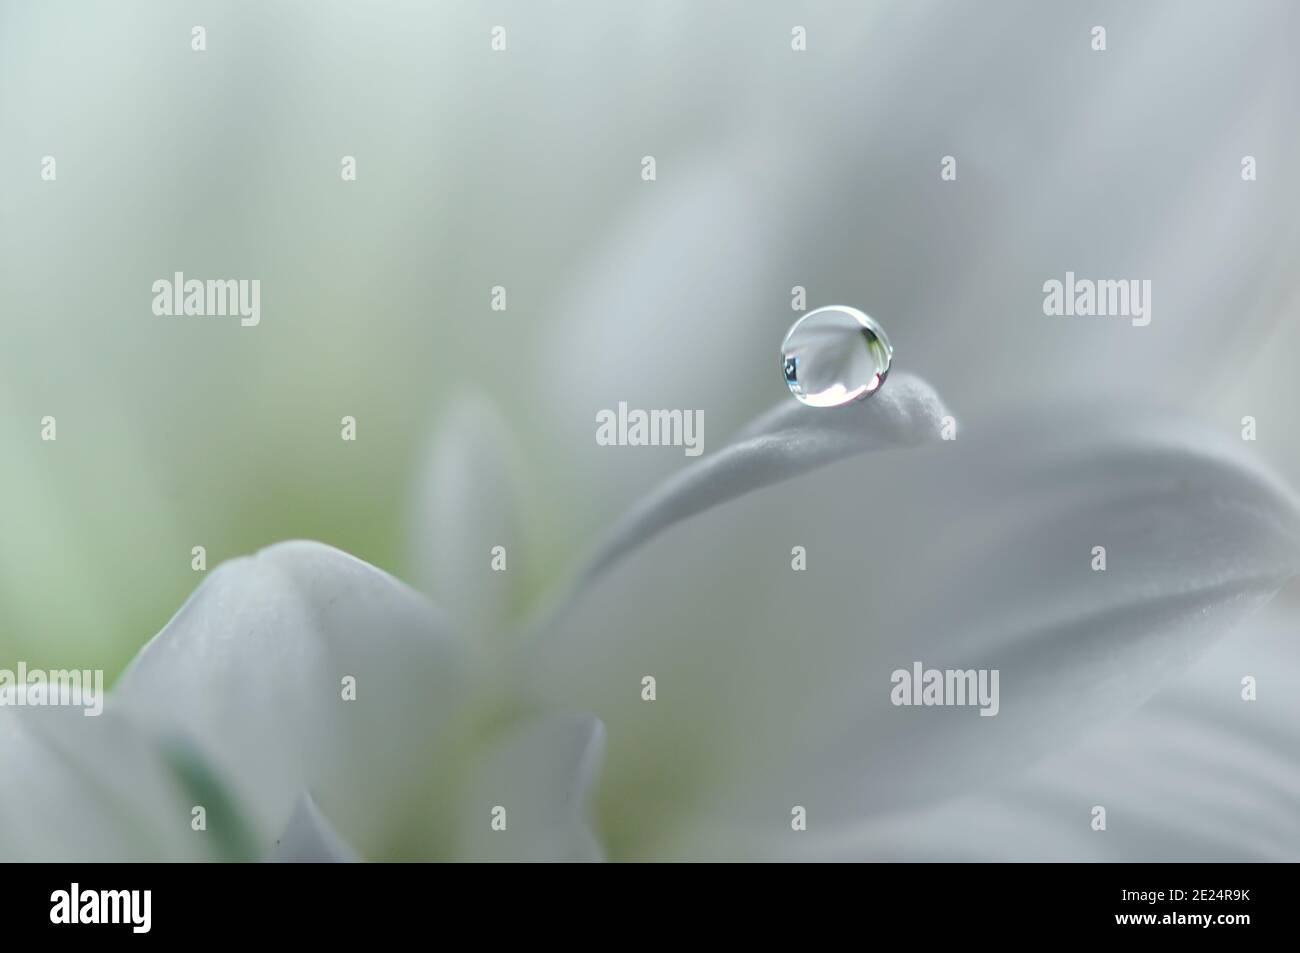 Close-up of a morning dew drop on a flower petal Stock Photo